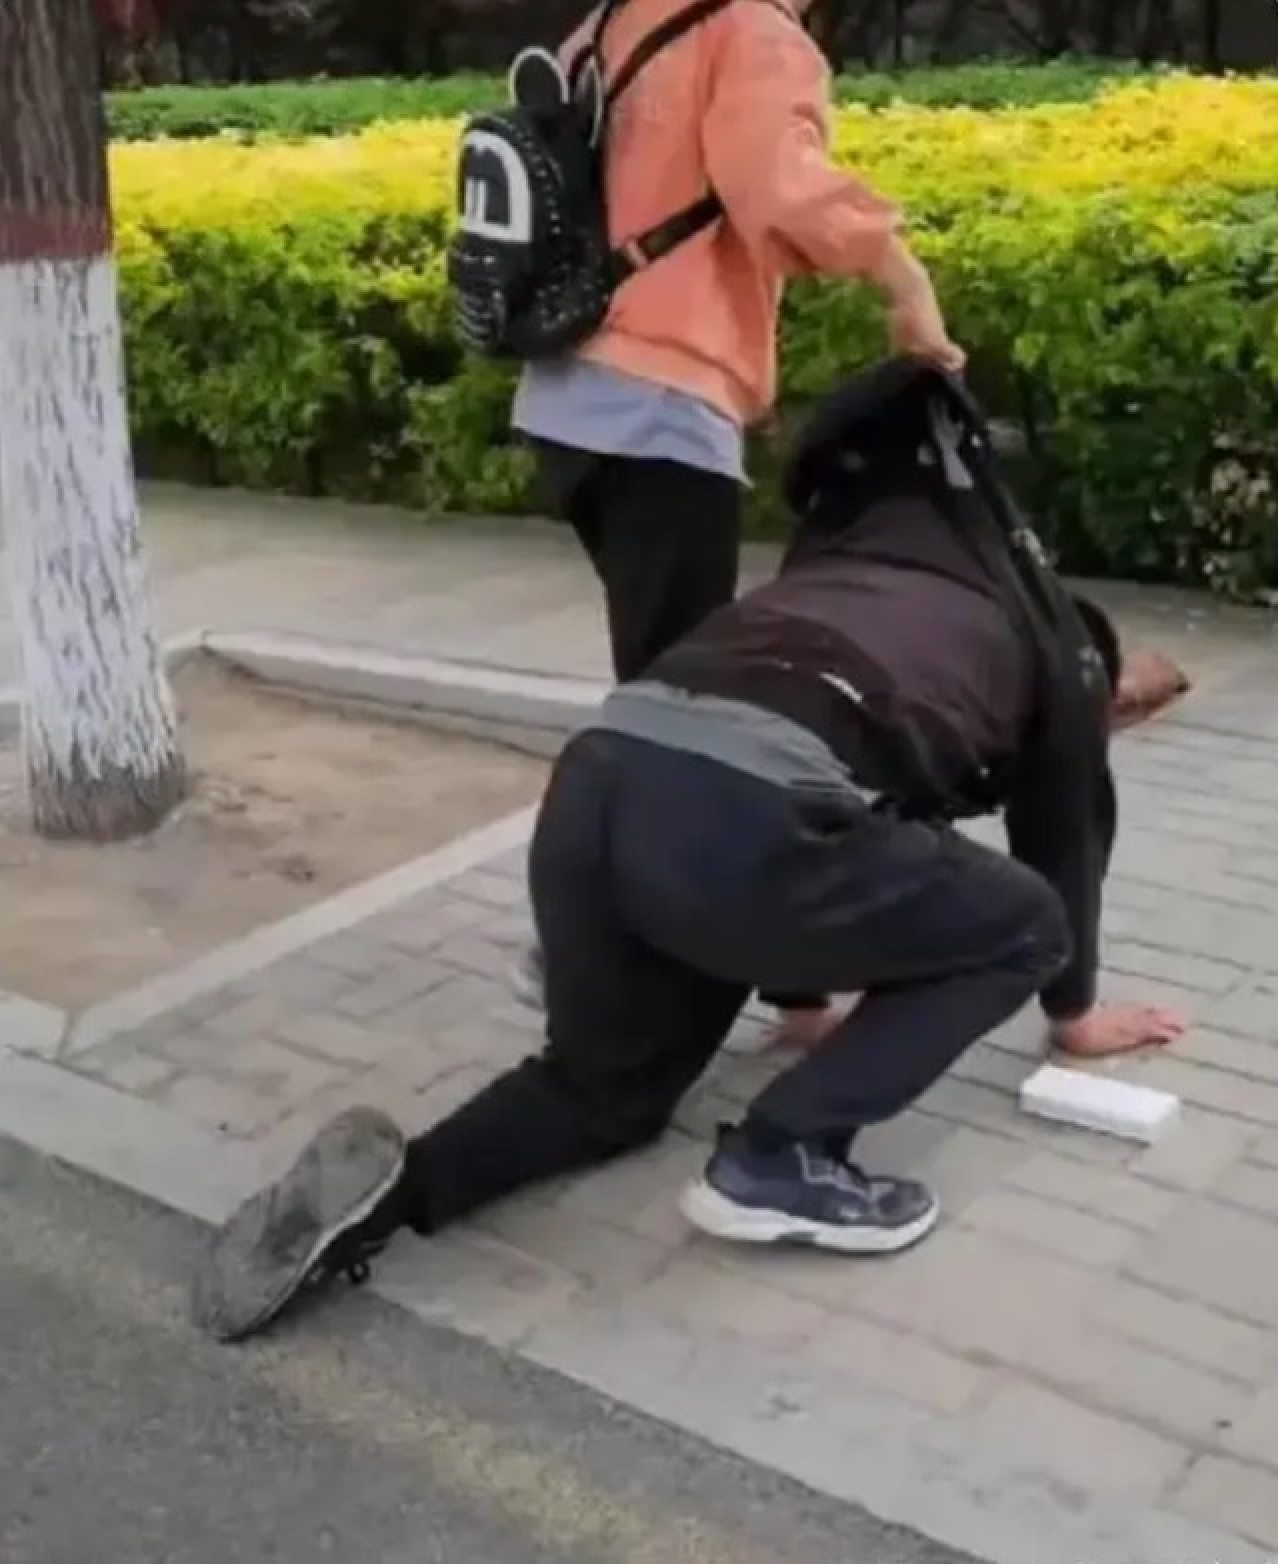 After the girl’s audible outburst directed at her dad for not able to buy her an iPhone, the father sank to his knees, shaking his head in self-reproach for his financial shortcomings. Photo: Baidu